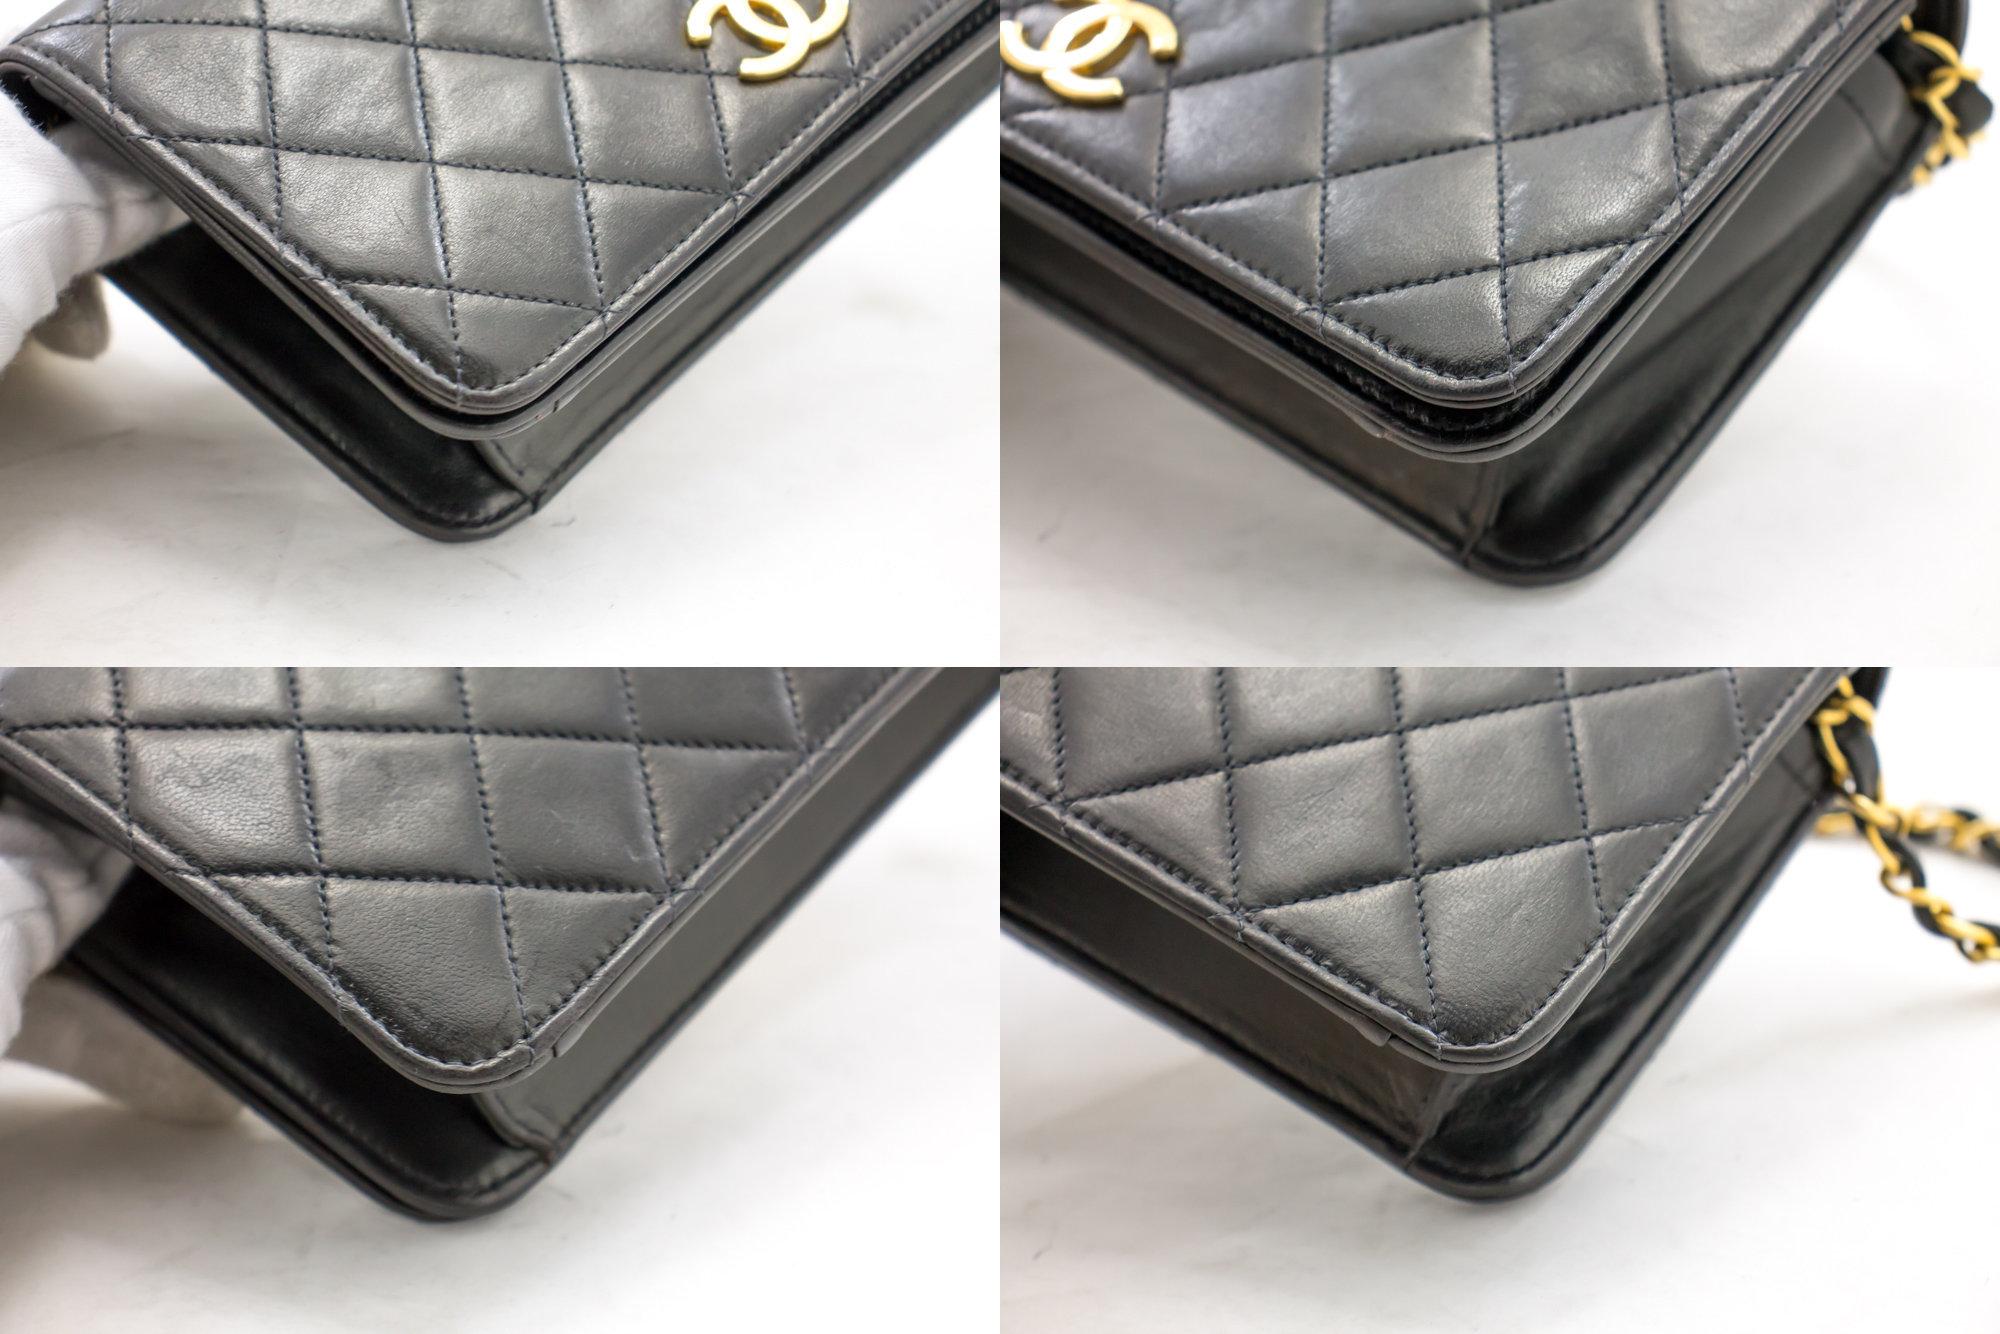 CHANEL Full Chain Flap Shoulder Bag Black Clutch Quilted Lambskin 2